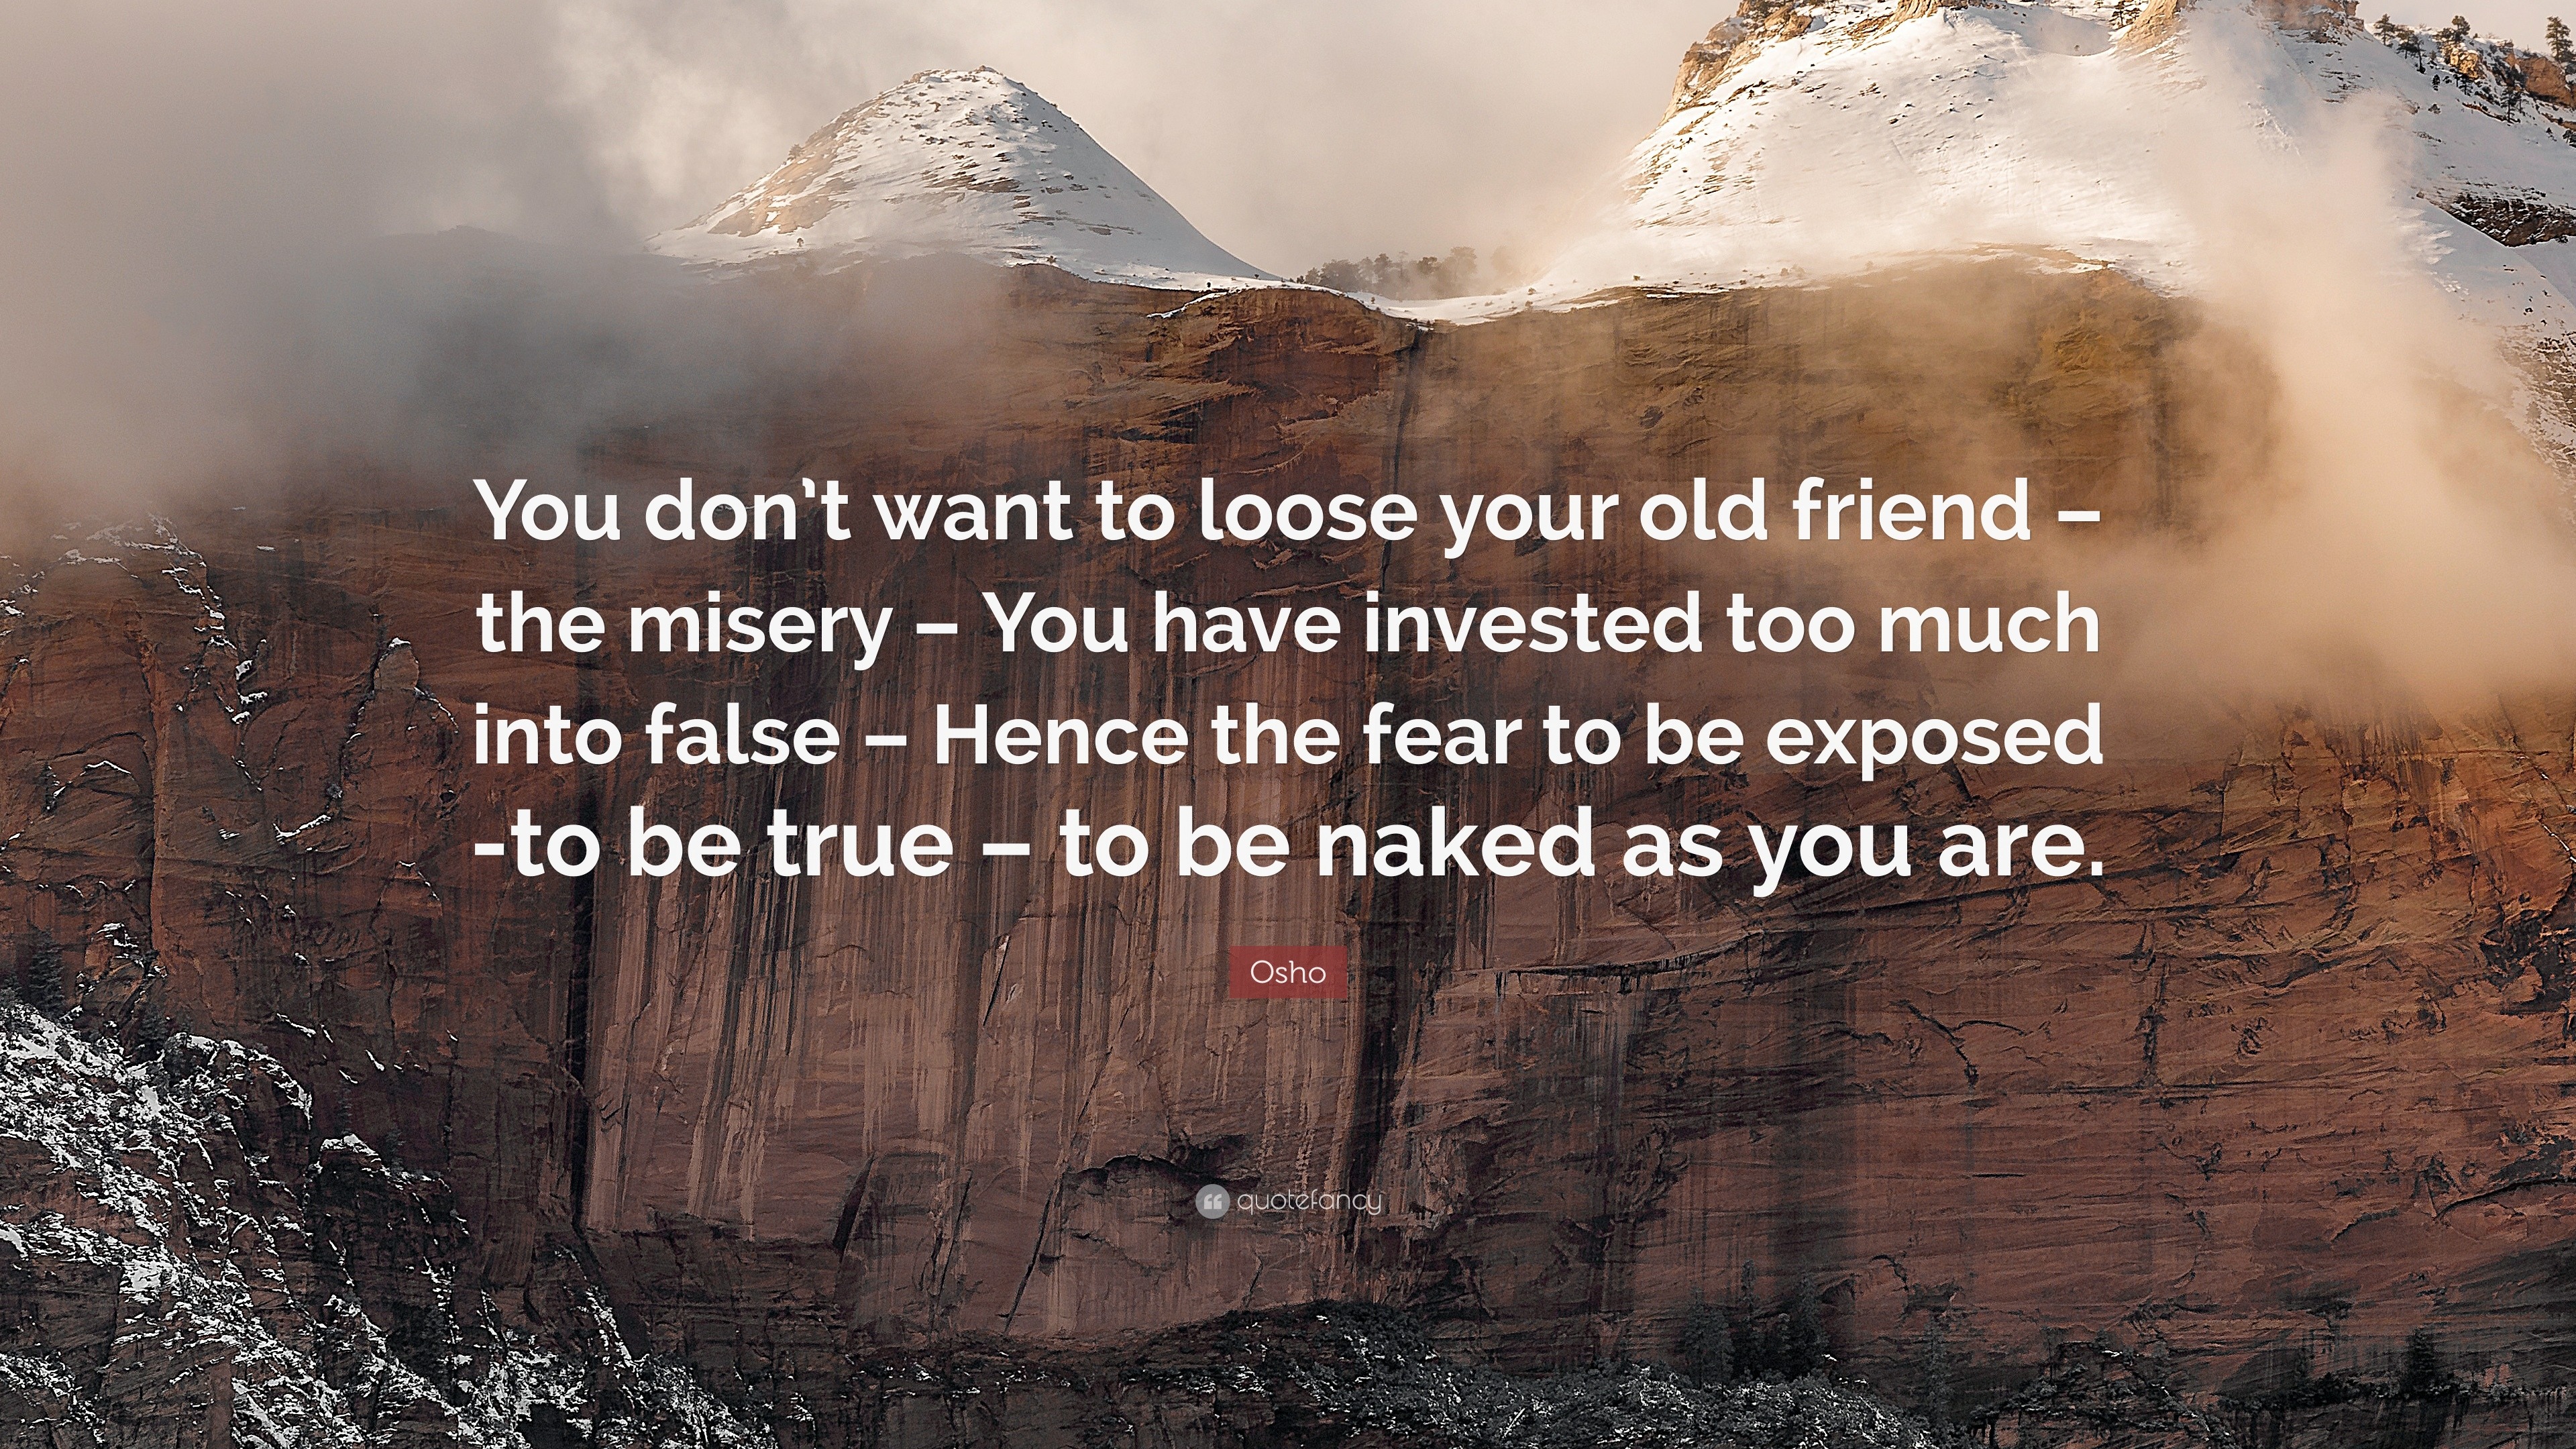 Osho Quote “You don t want to loose your old friend – the